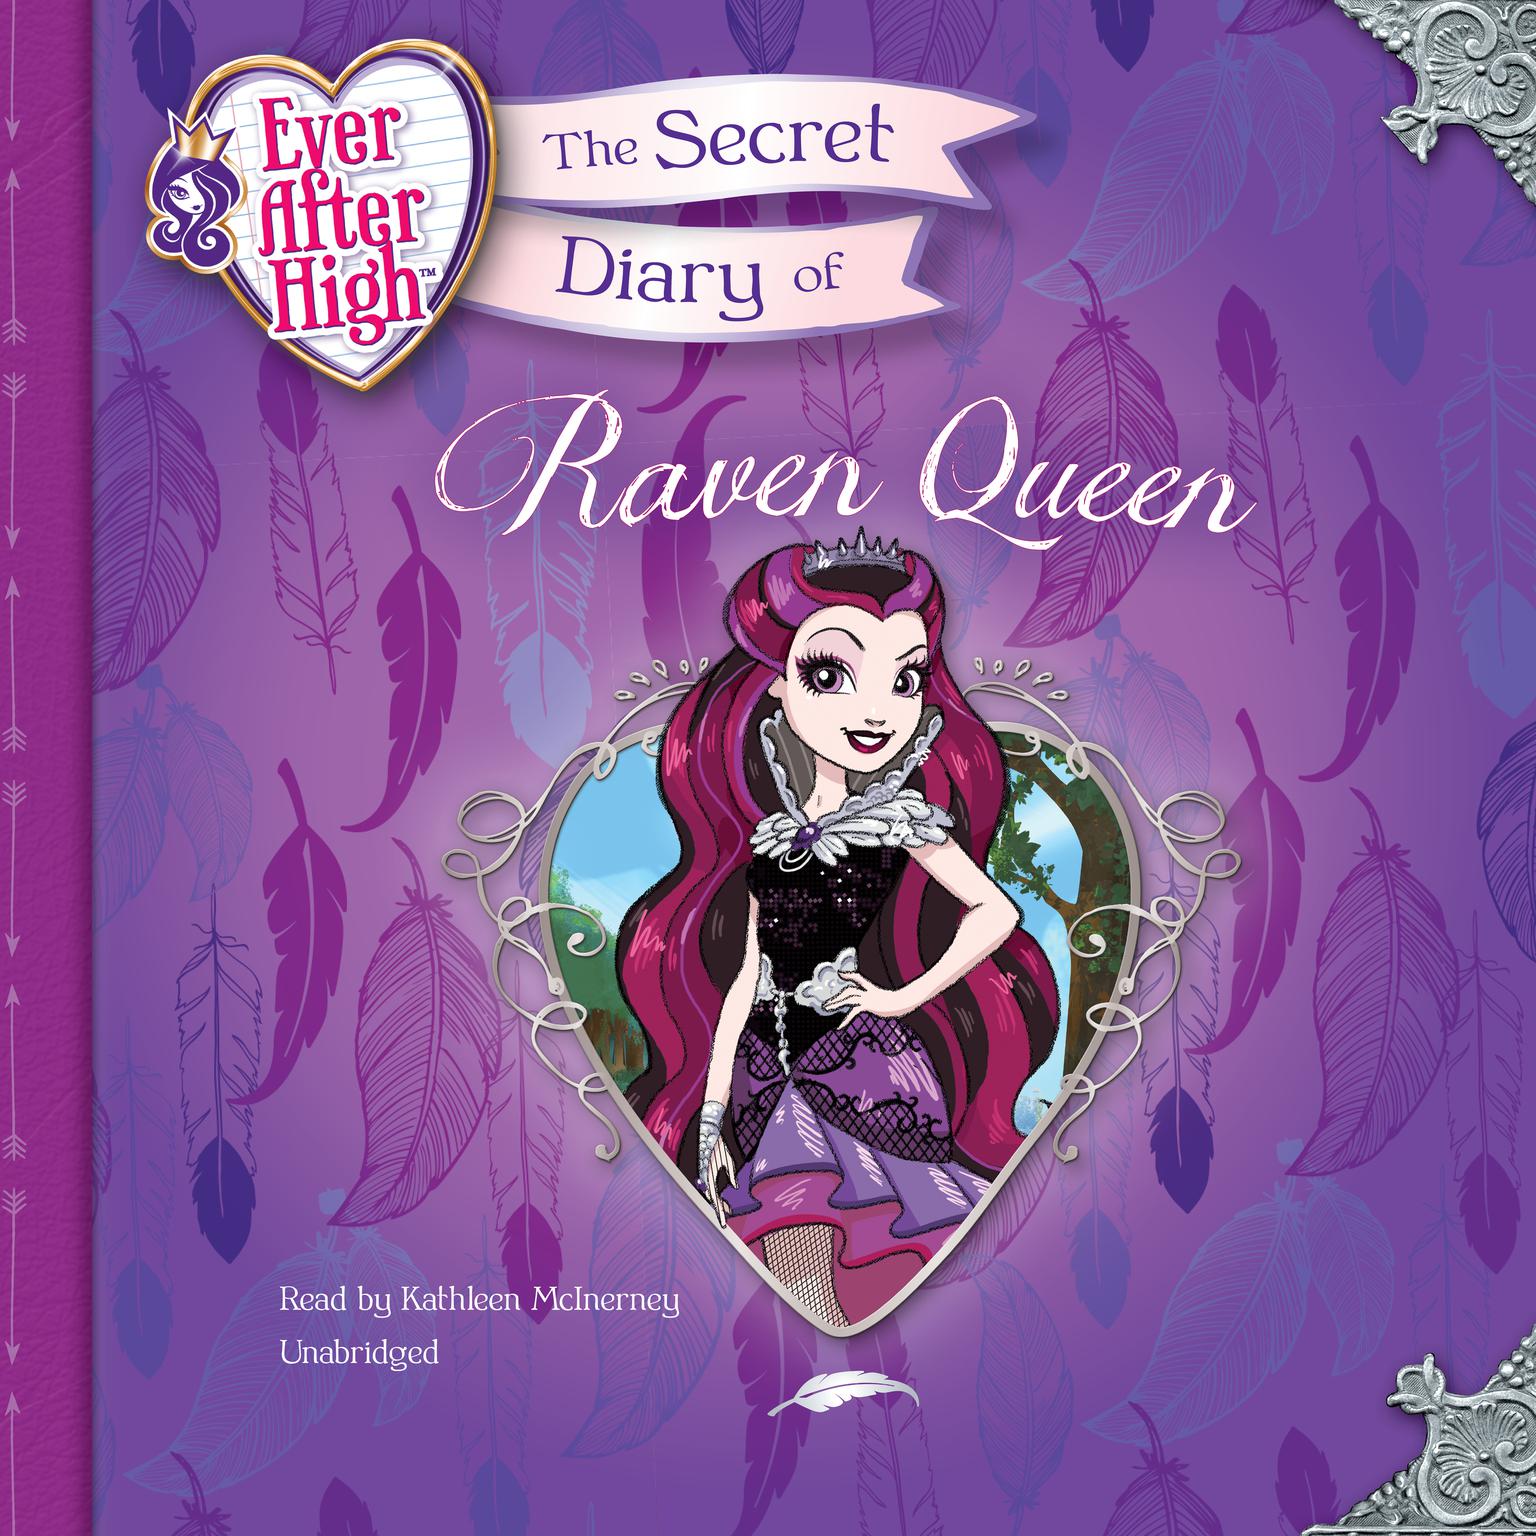 Ever After High: The Secret Diary of Raven Queen Audiobook, by Heather Alexander